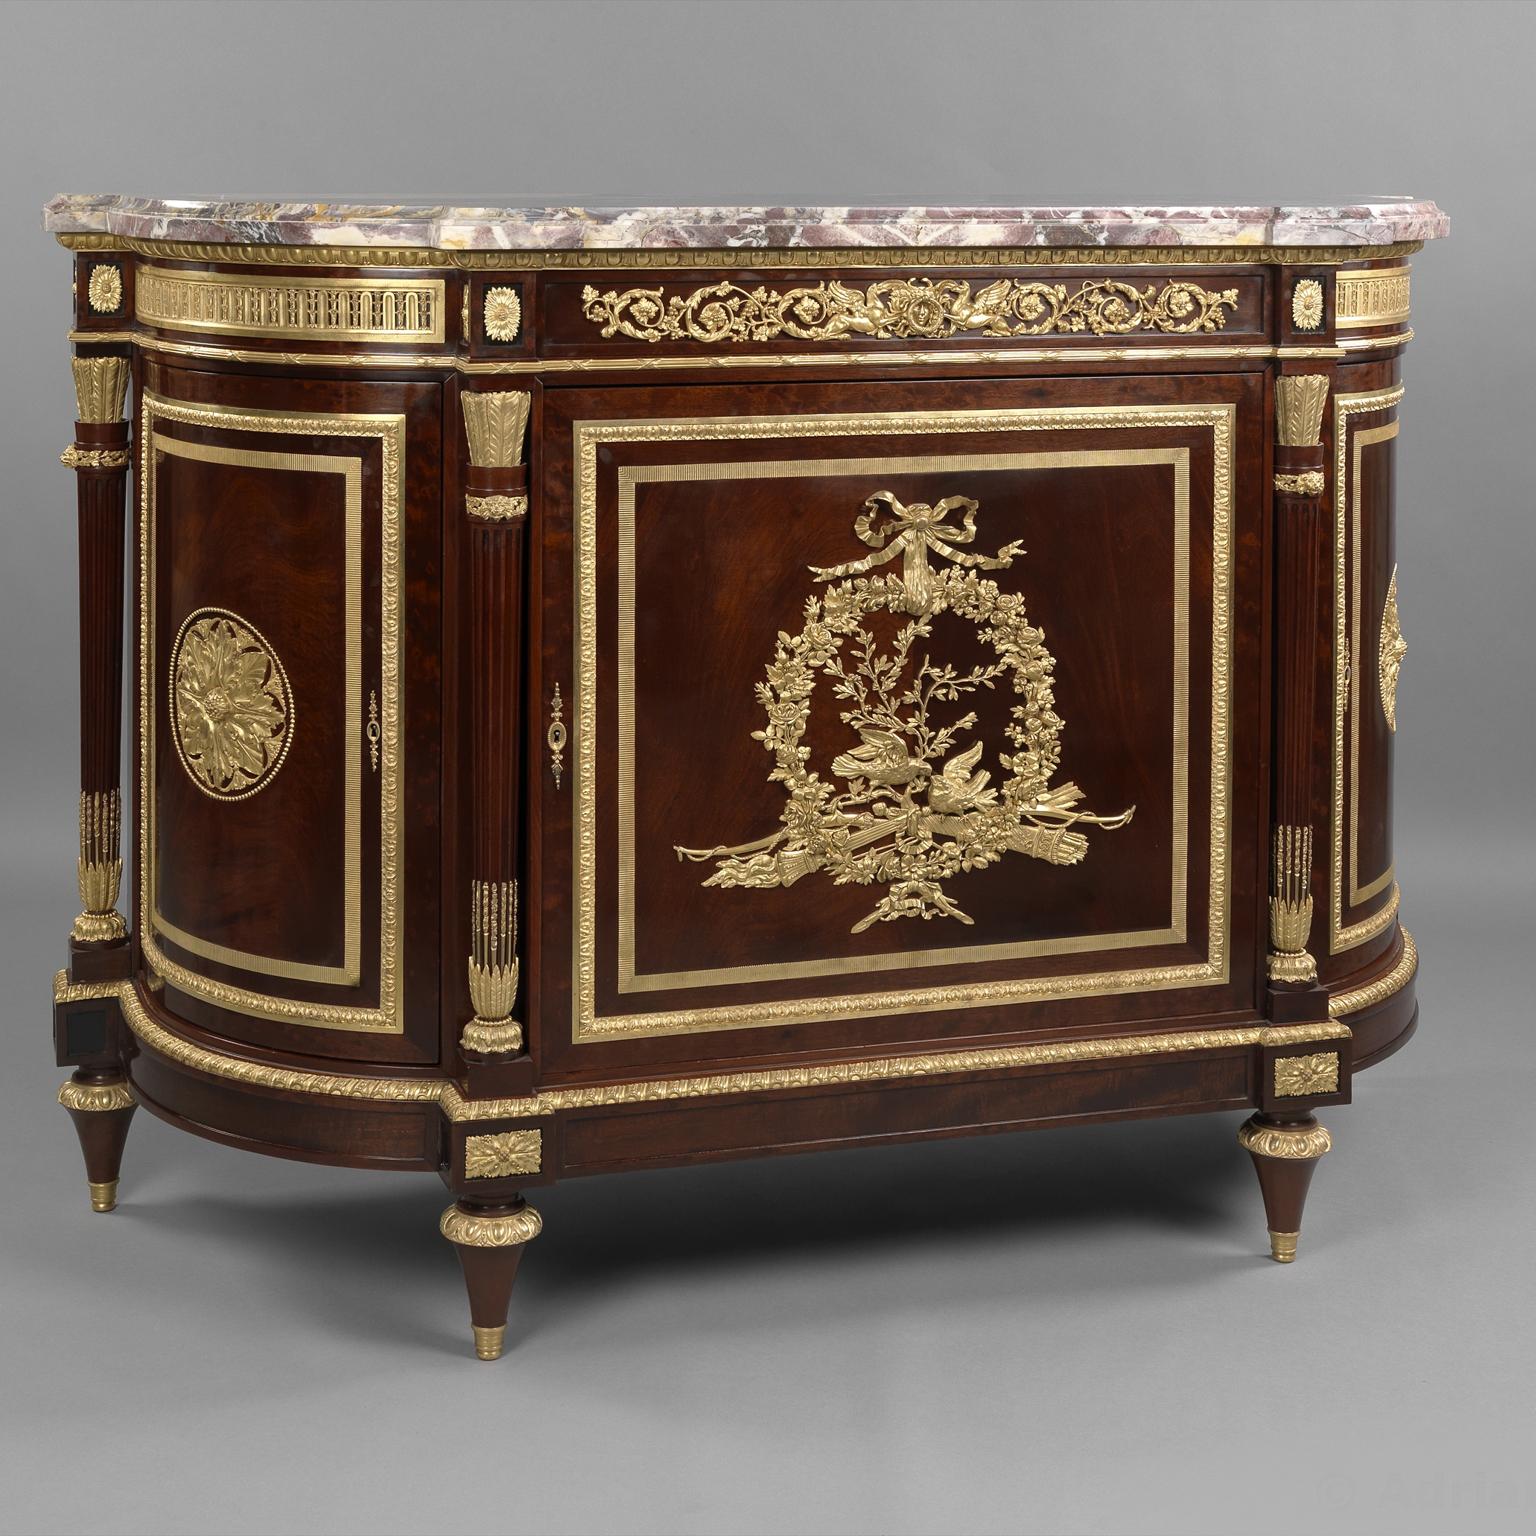 A very fine Louis XVI style gilt bronze mounted mahogany side cabinet with a Brèche Violette marble top, by Henry Dasson.

Stamped to the top of the carcass ‘Henry Dasson’. 

This fine side cabinet has a moulded brèche Violette marble top above